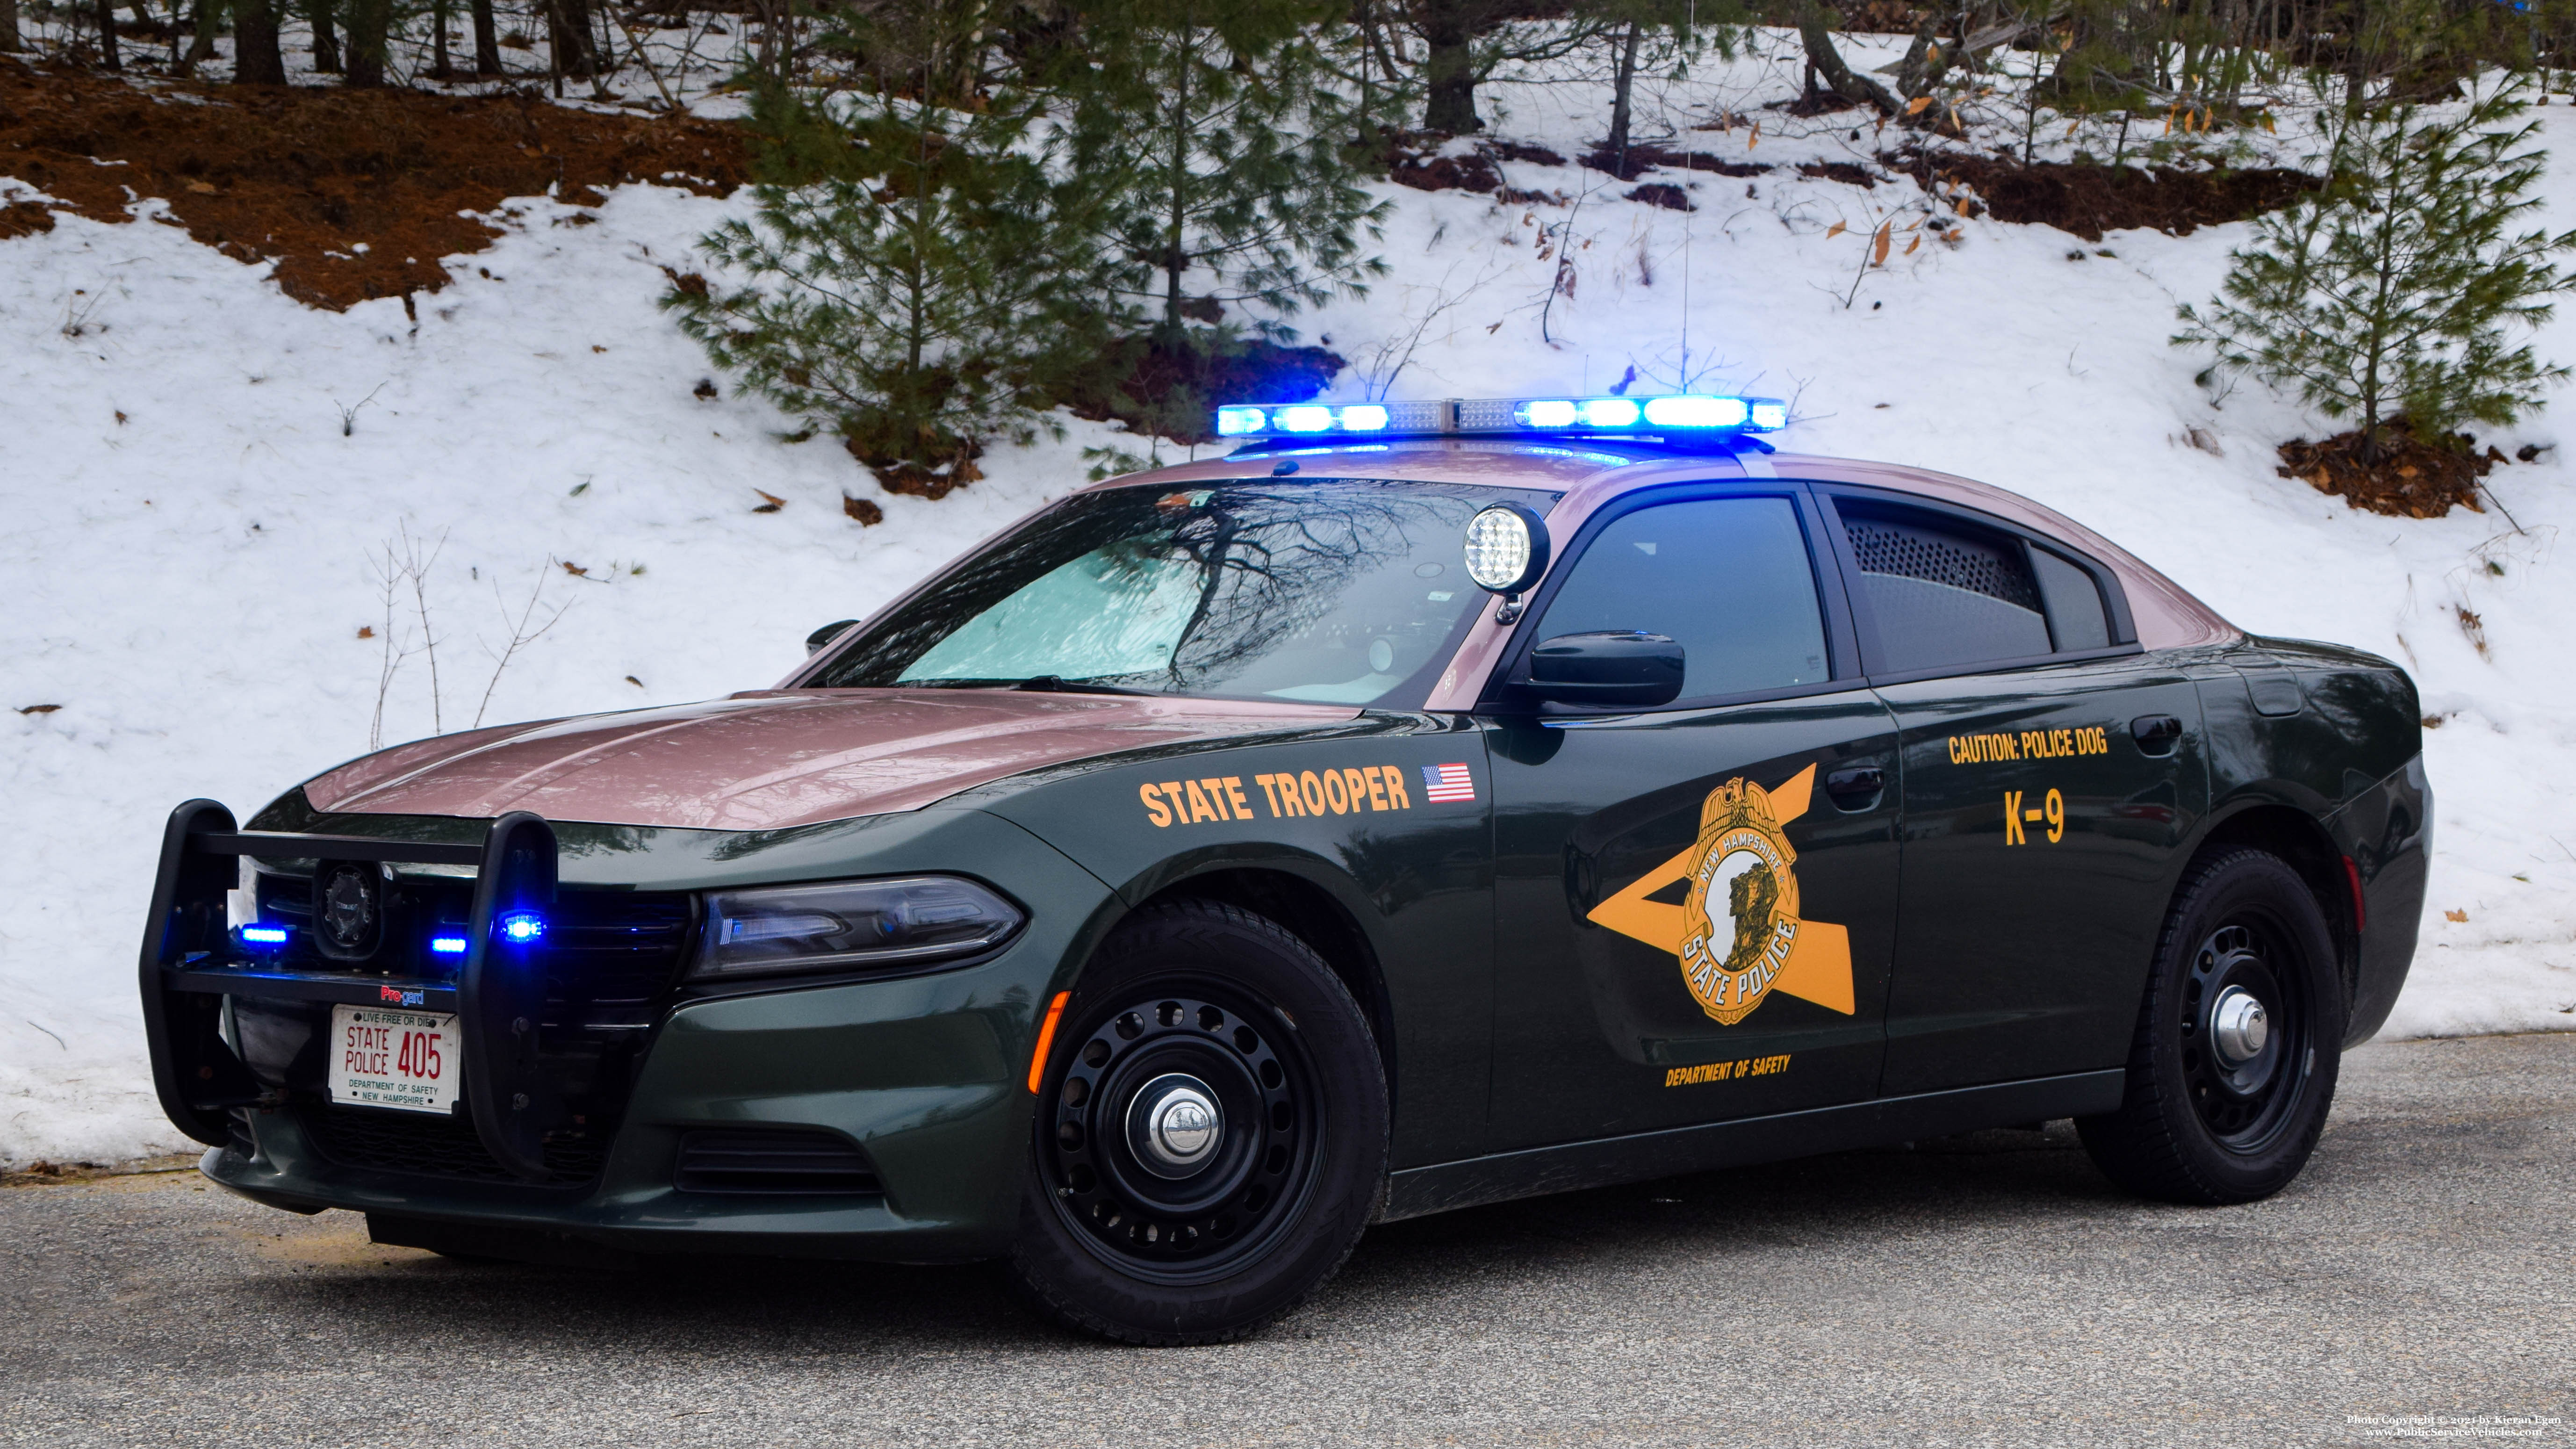 A photo  of New Hampshire State Police
            Cruiser 405, a 2016 Dodge Charger             taken by Kieran Egan